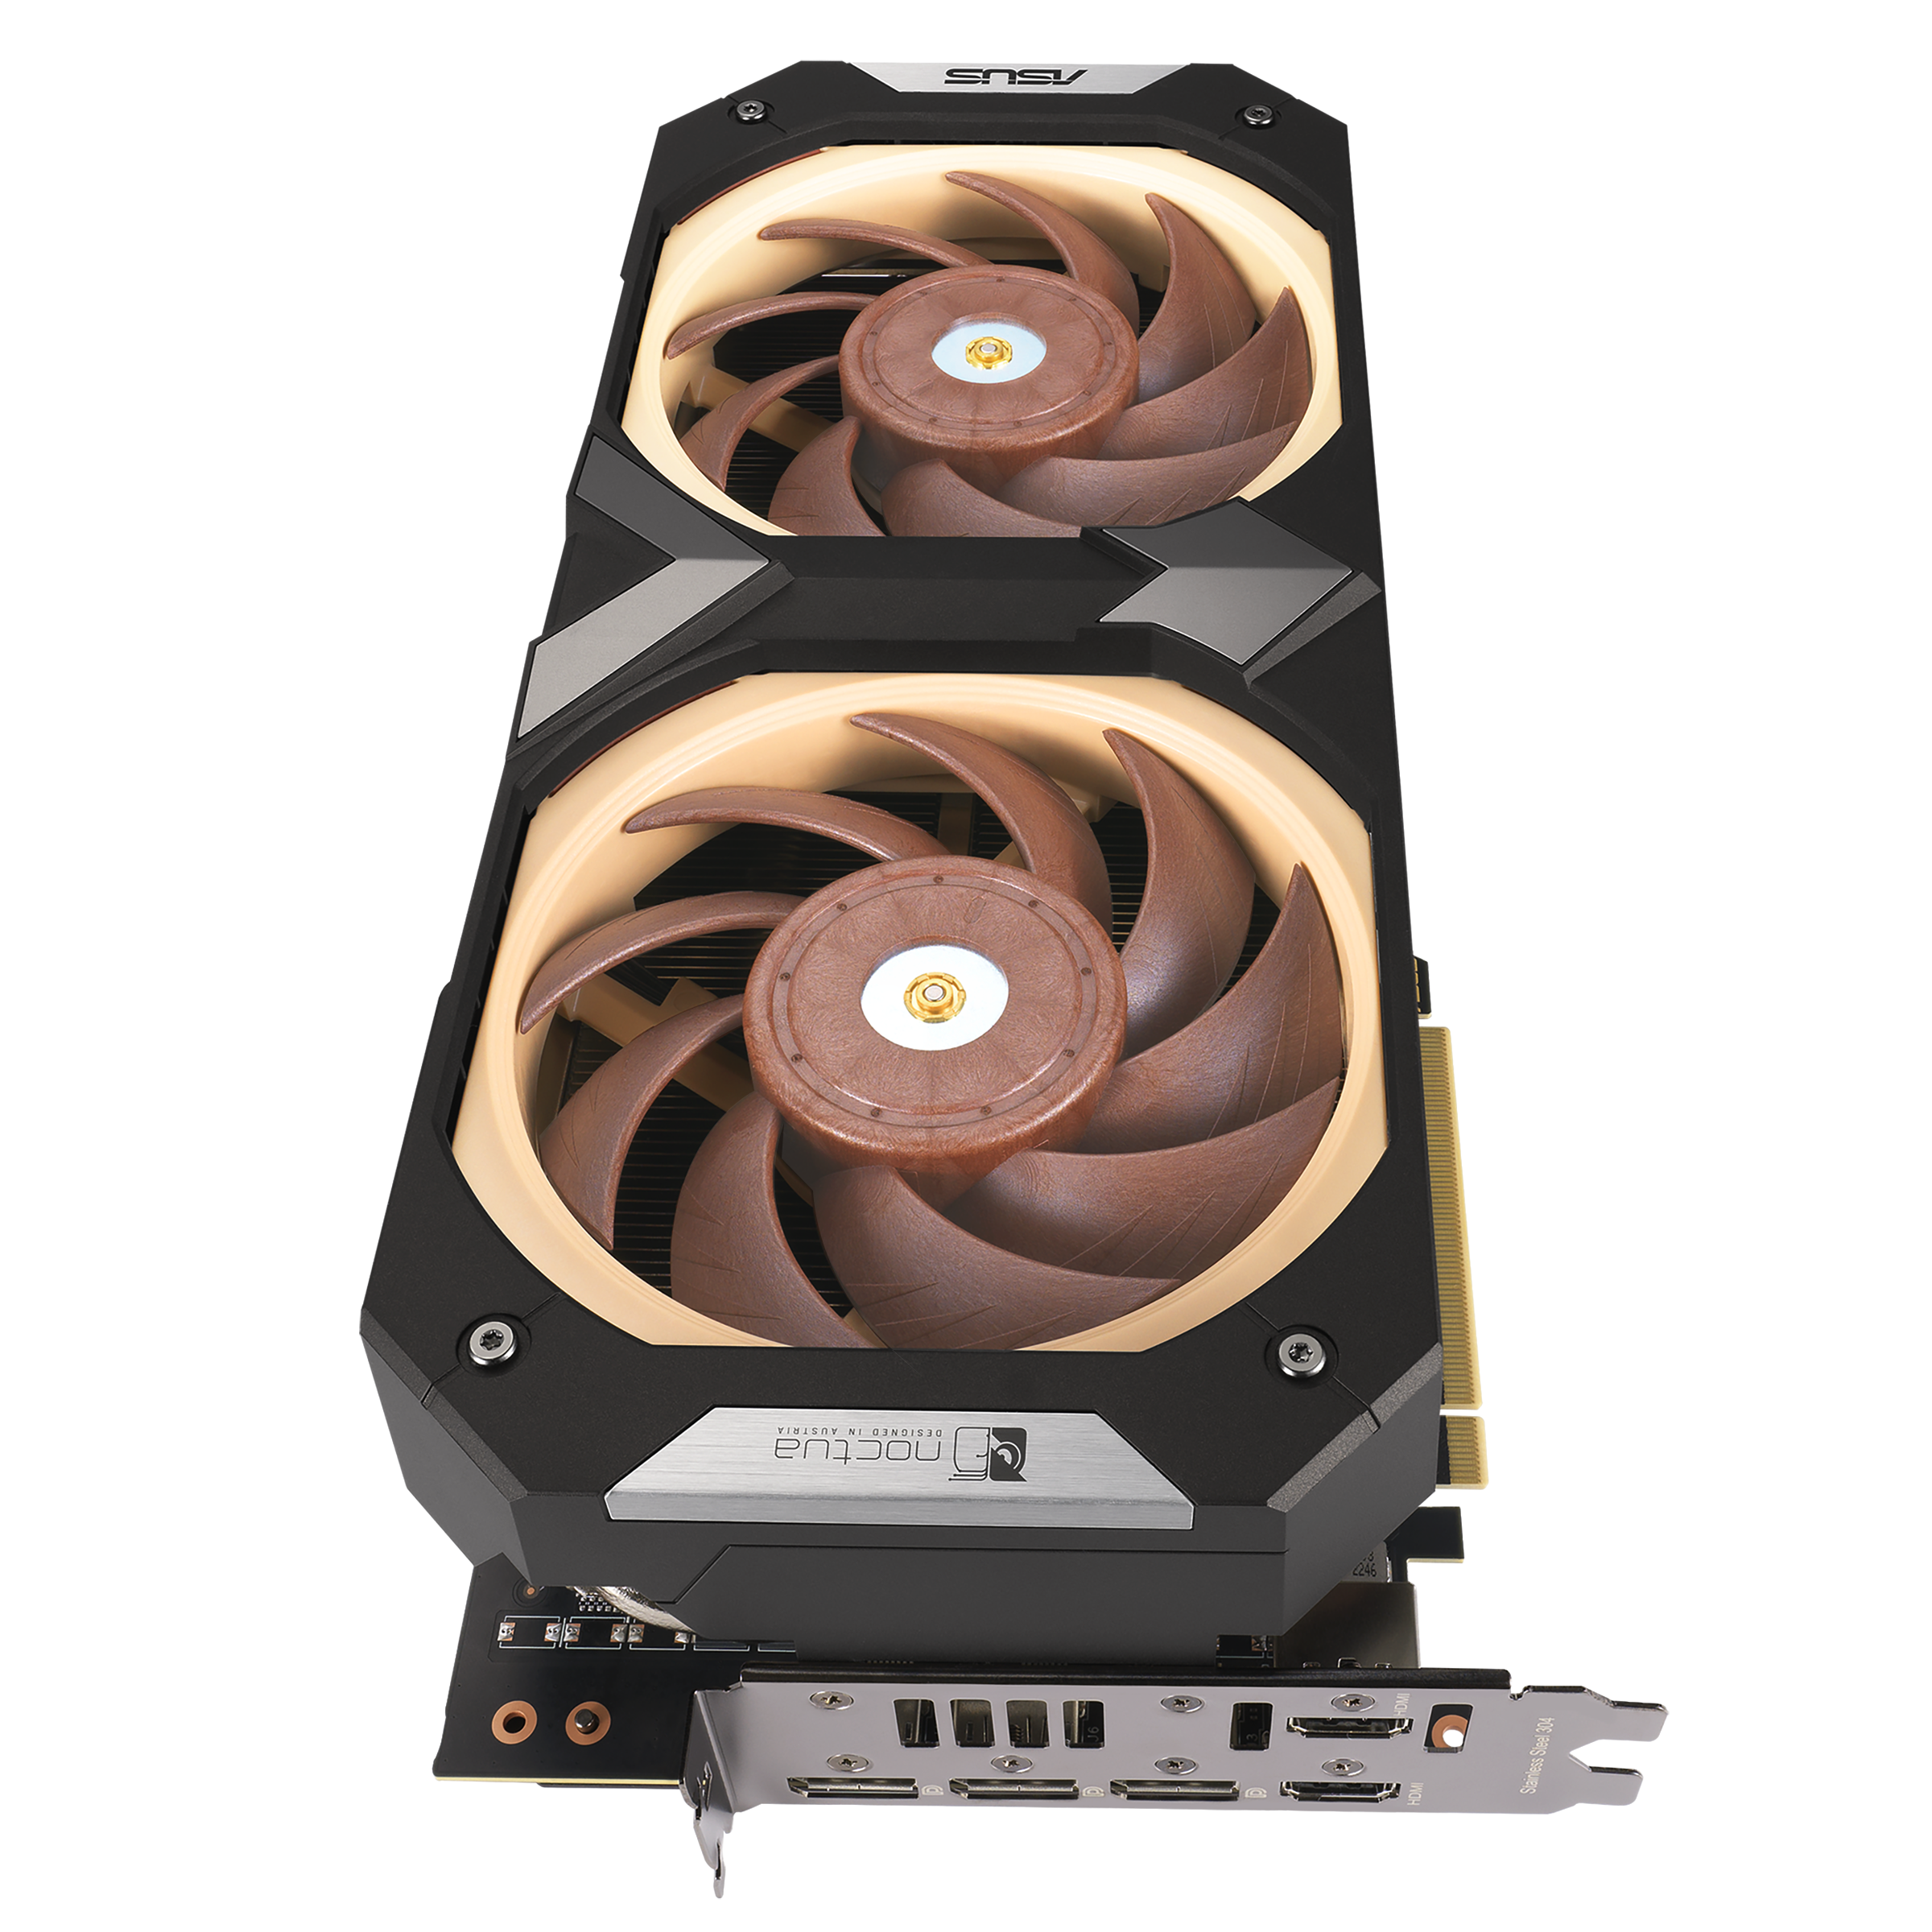 ASUS officially launches their RTX 4080 Noctua Edition graphics card - OC3D